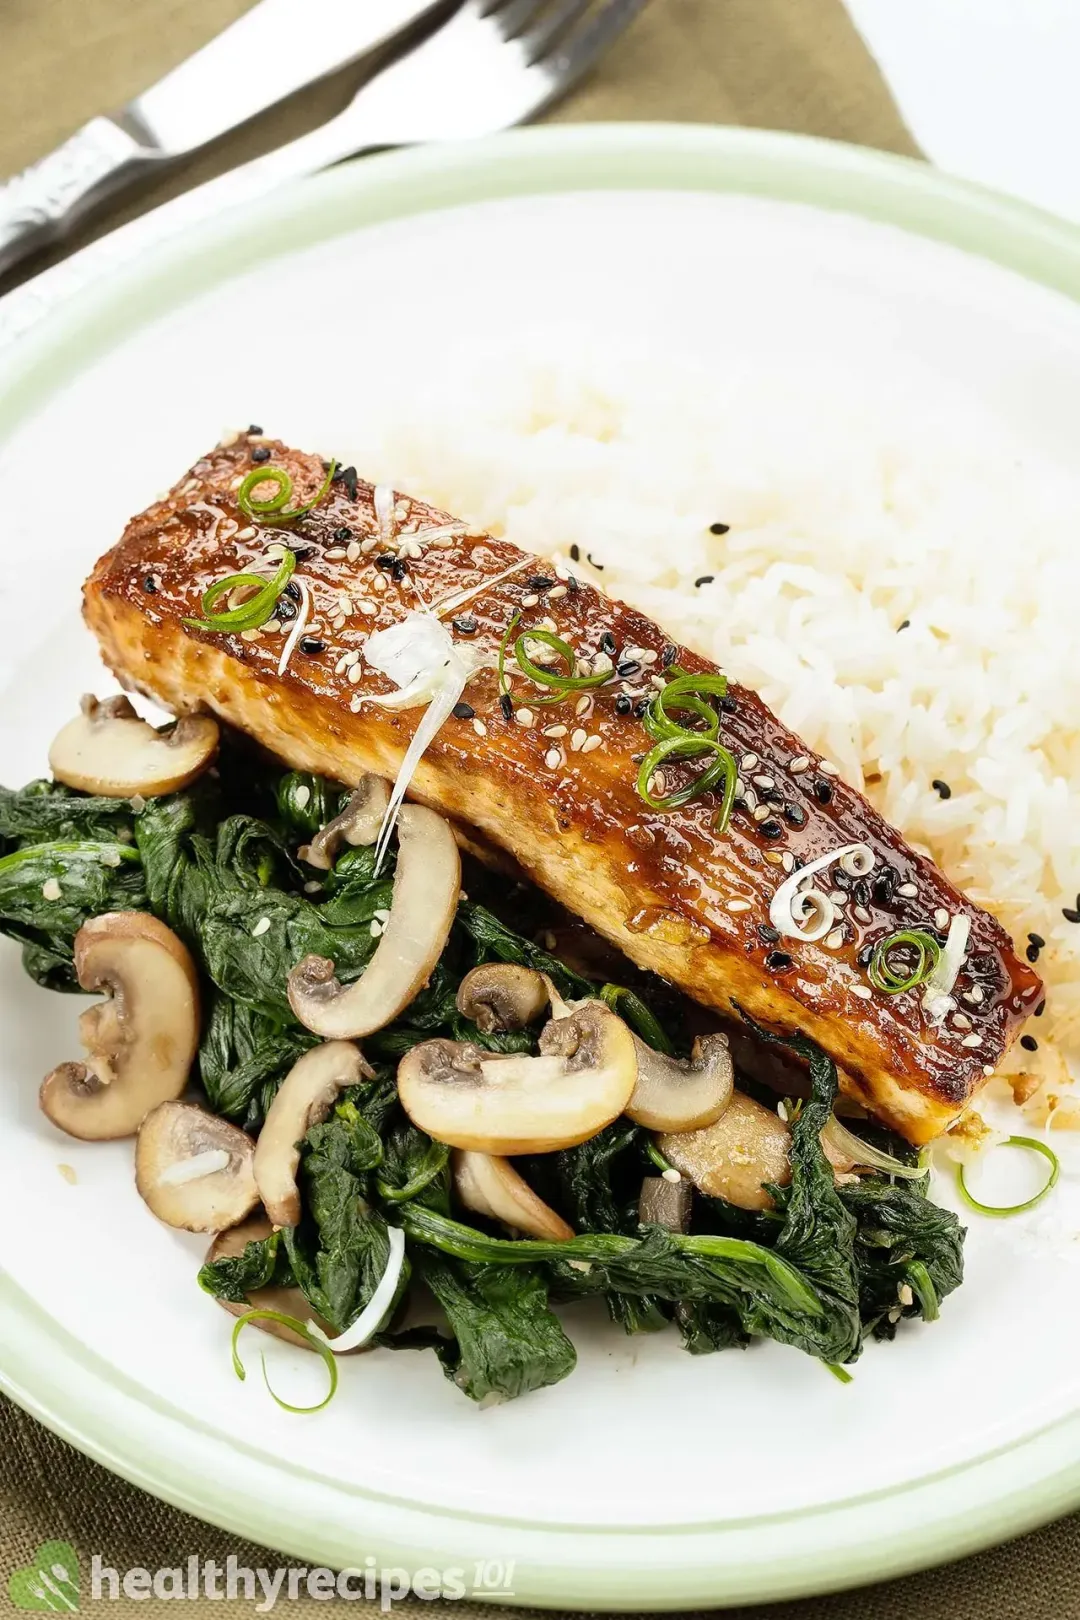 A plate containing a piece of salmon glazed with miso sauce, served alongside cremini mushroom slices, cooked spinach, and white rice